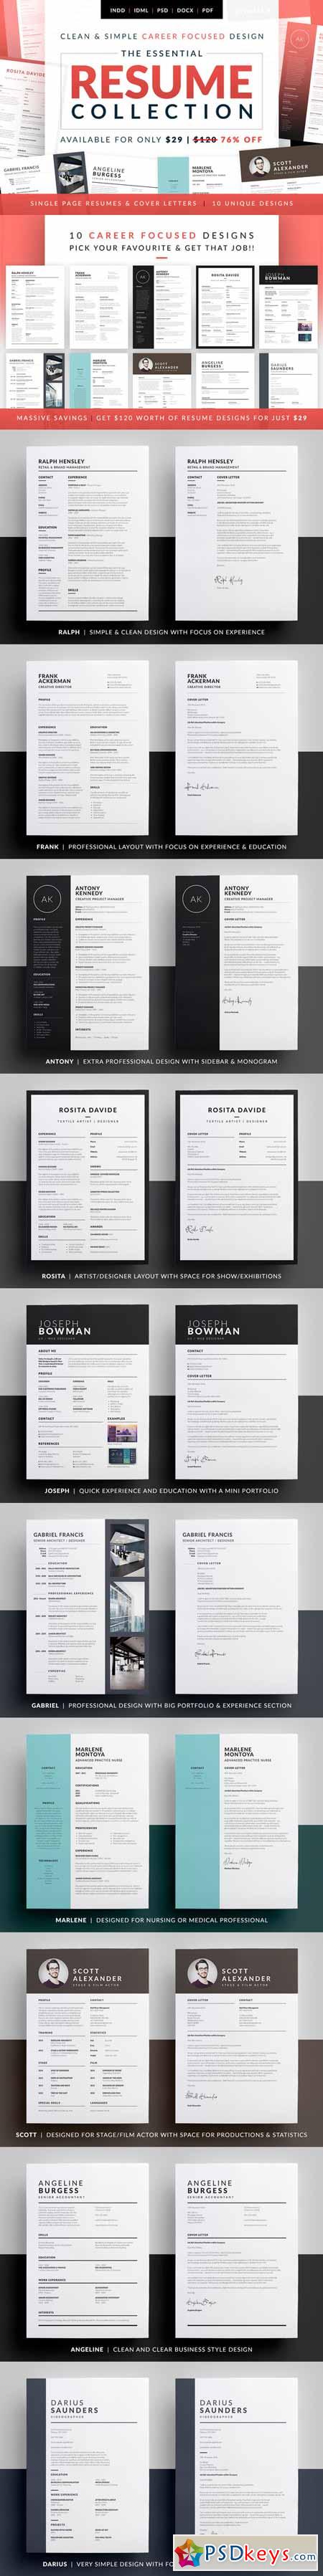 Essential Resume Collection 556791